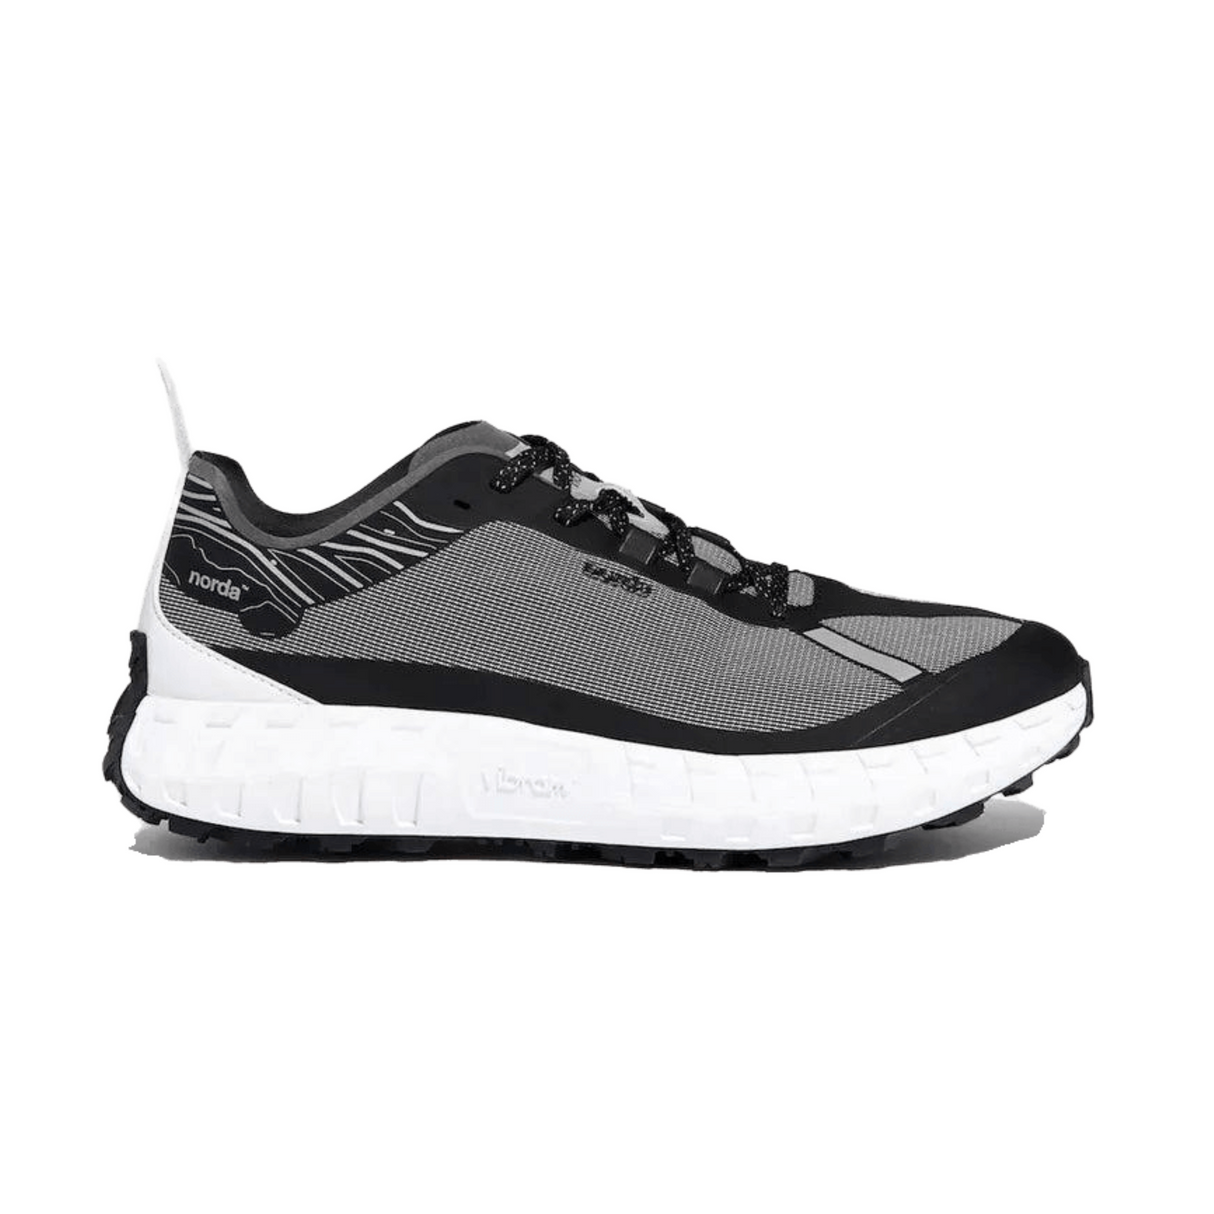 Norda - norda Men's 001 Core - Carry Over Trail Running Shoes (Black) - Cam2 